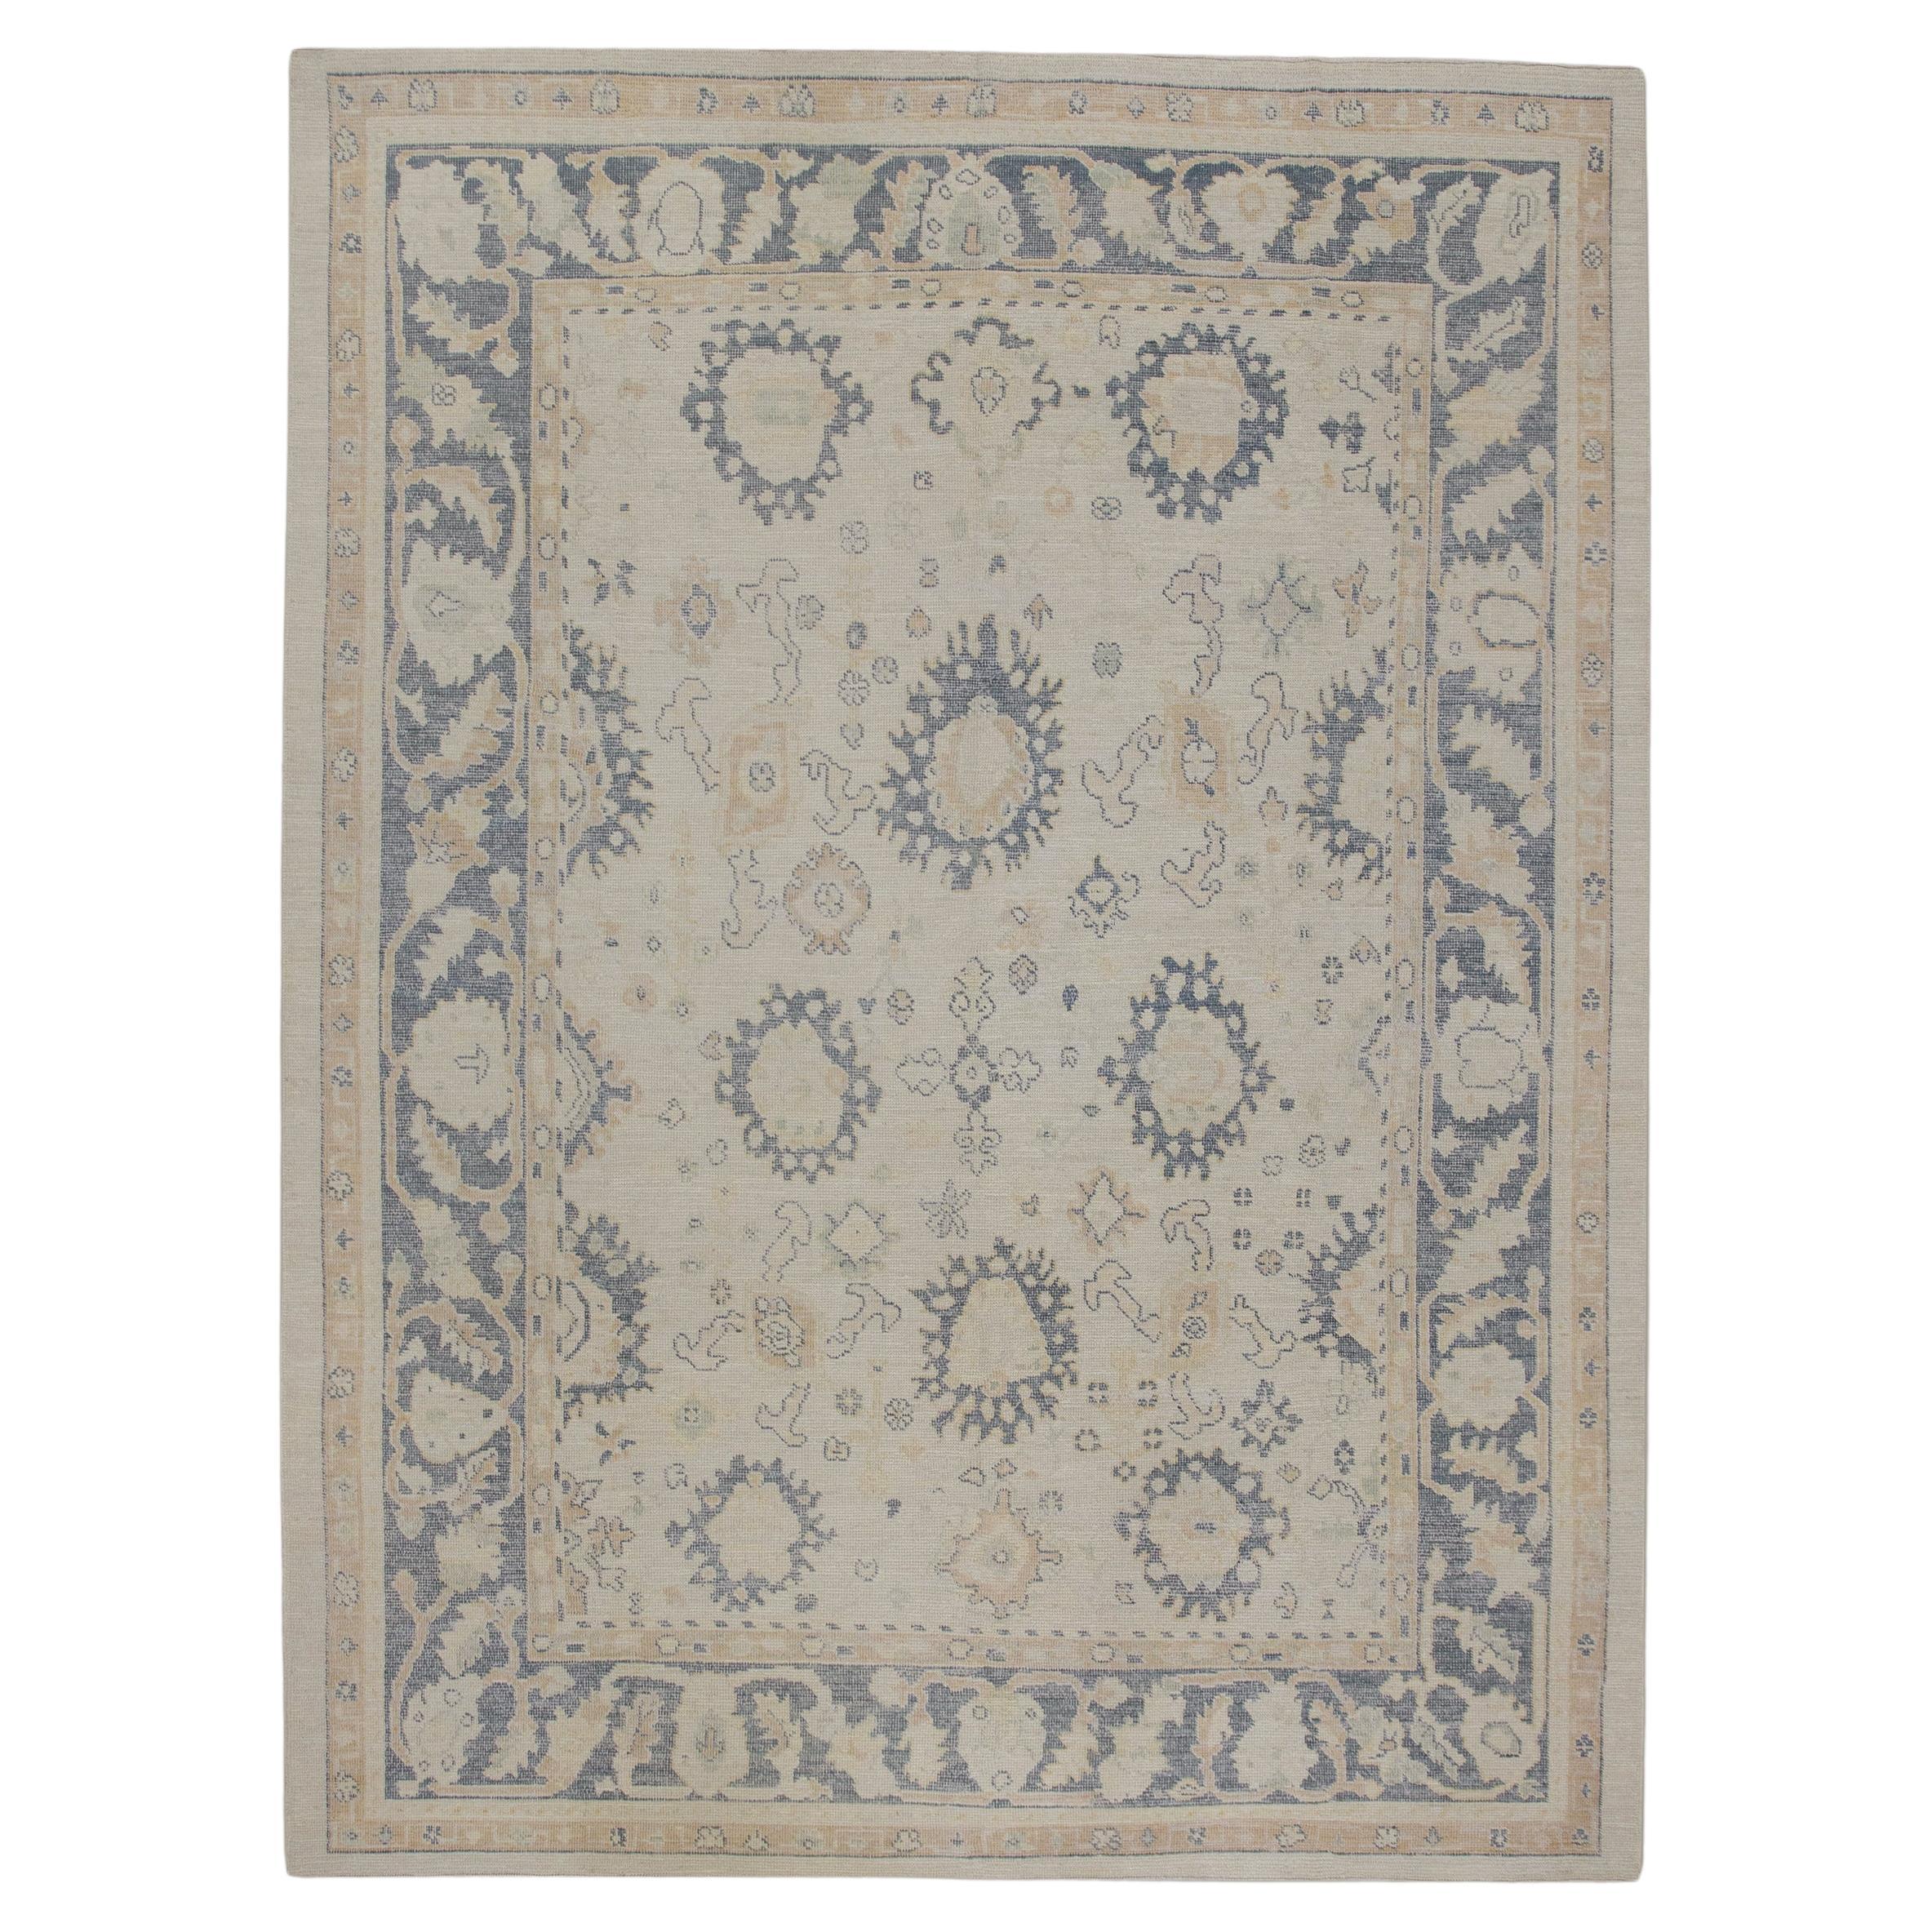 Cream Handwoven Wool Turkish Oushak Rug in Blue Floral Pattern 8'11" X 12'1" For Sale